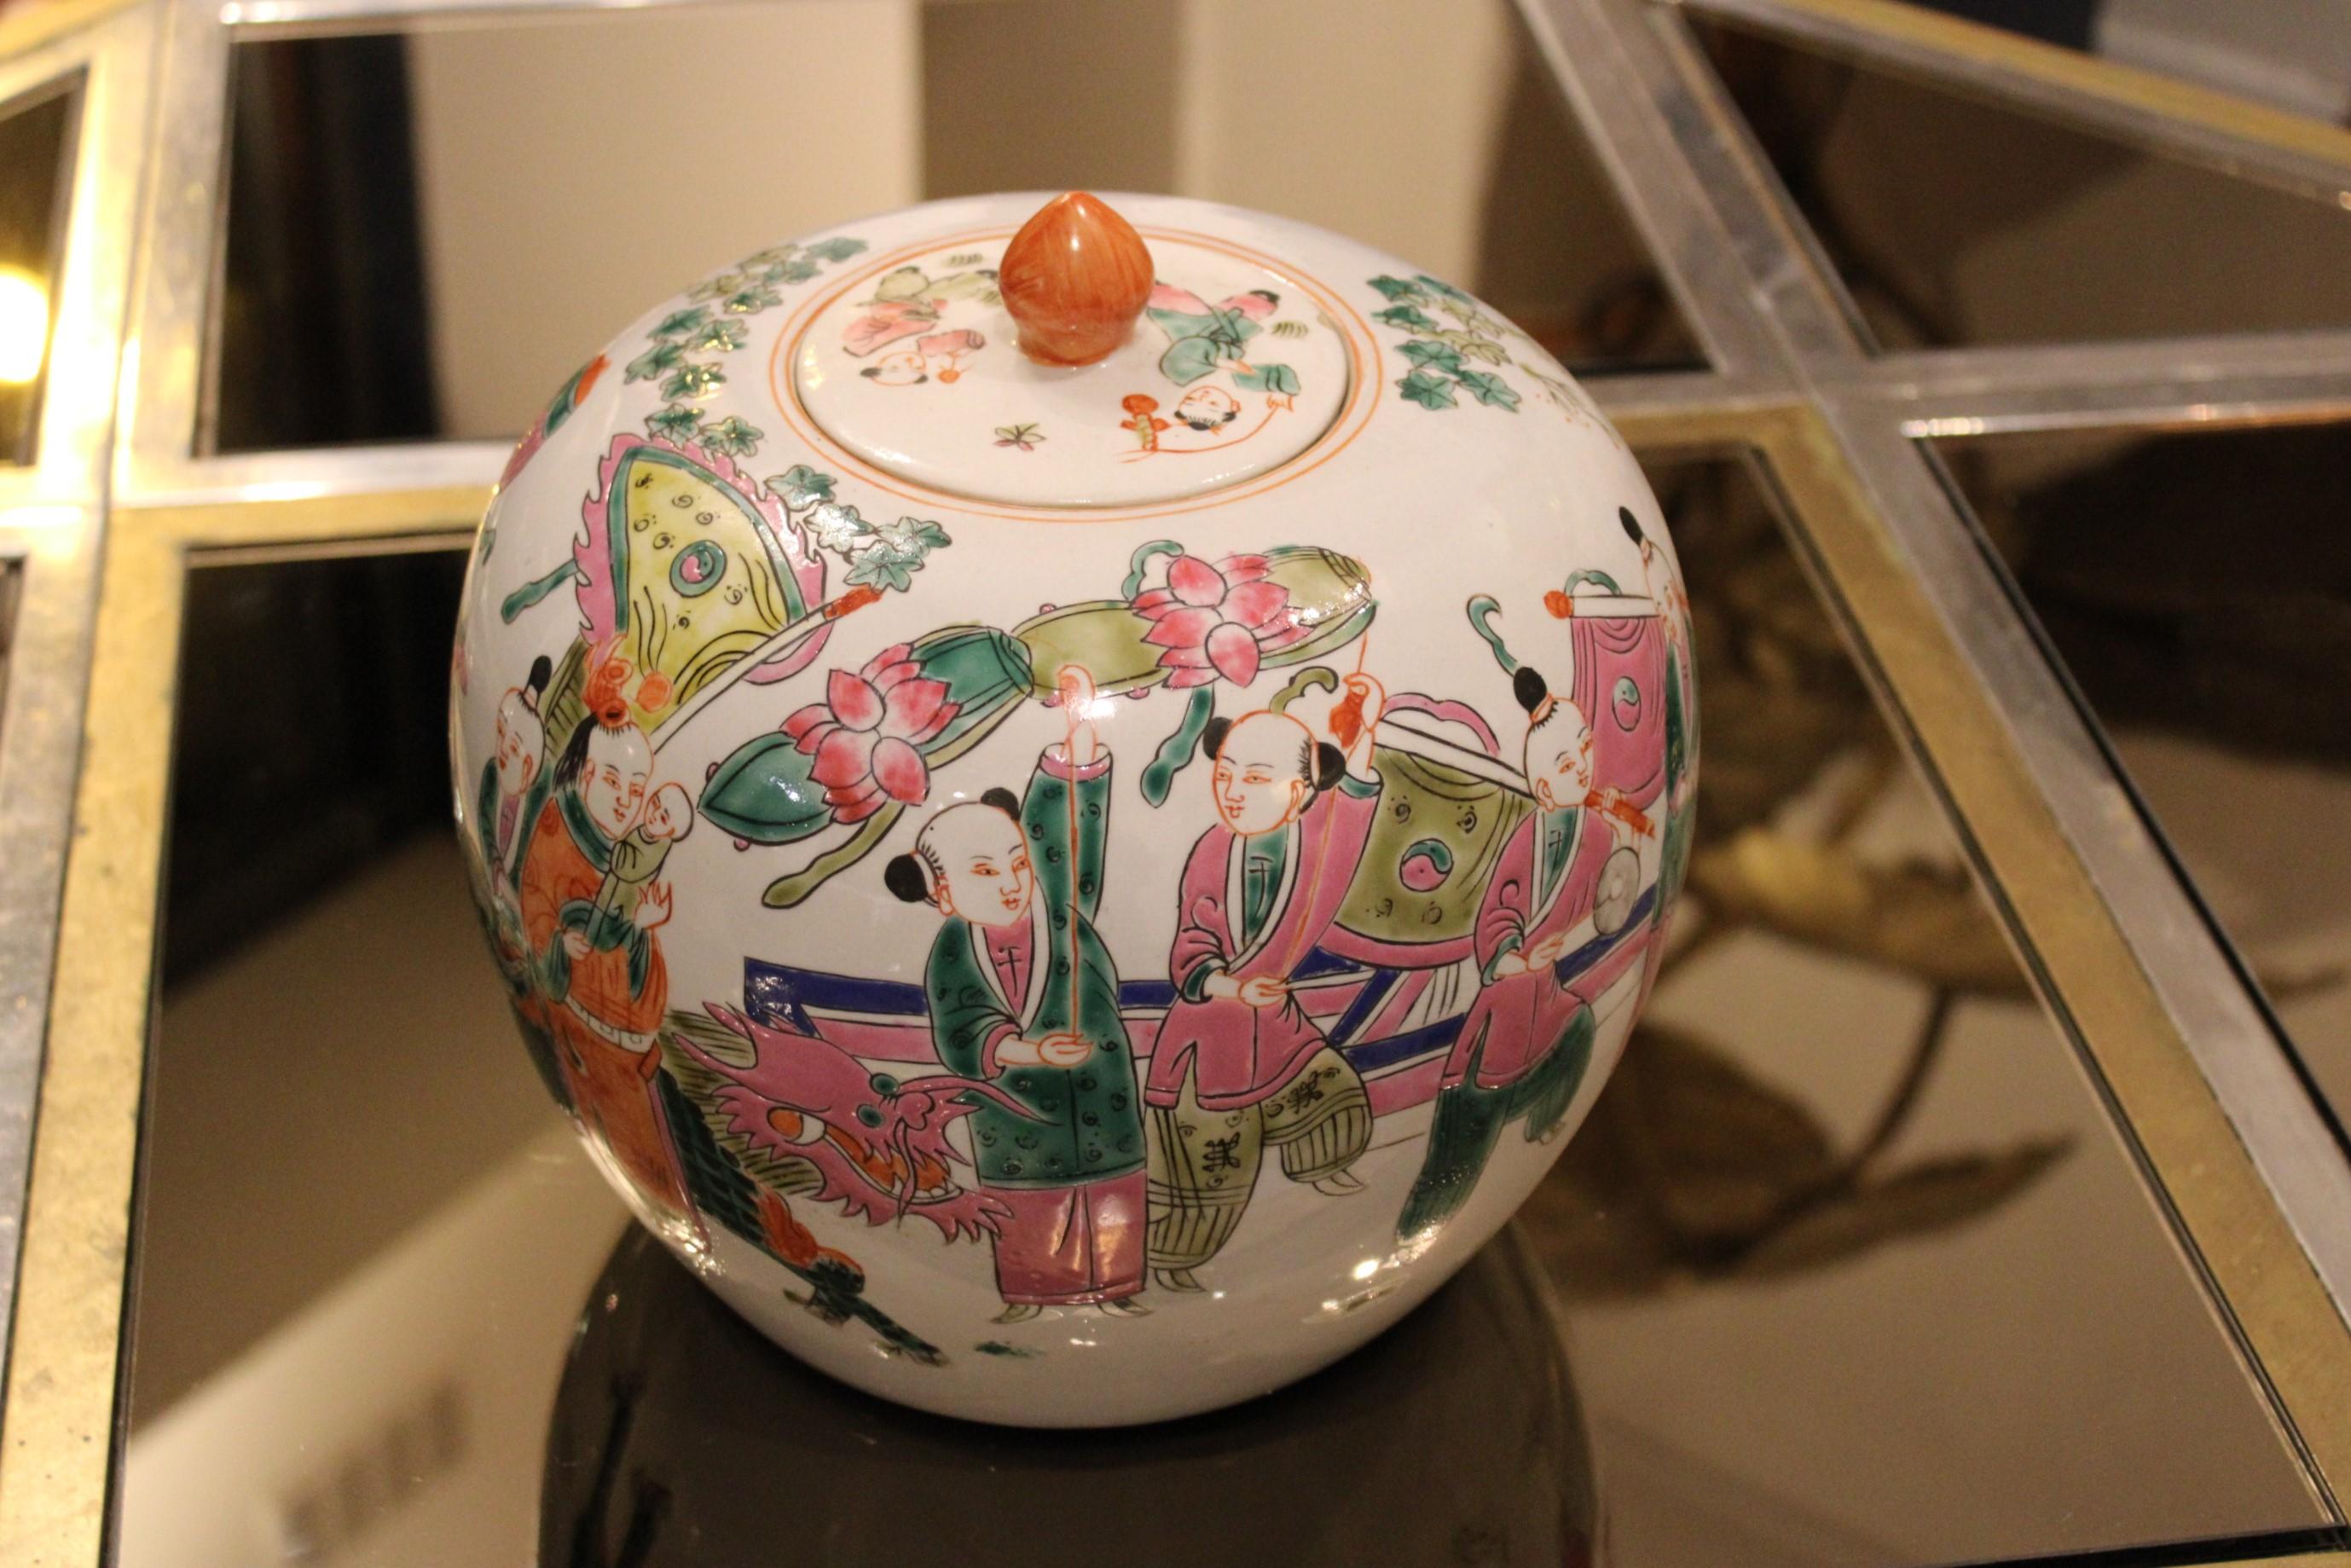 Ginger jar in porcelain, with a lid.
Characters decor
China, 20th century.